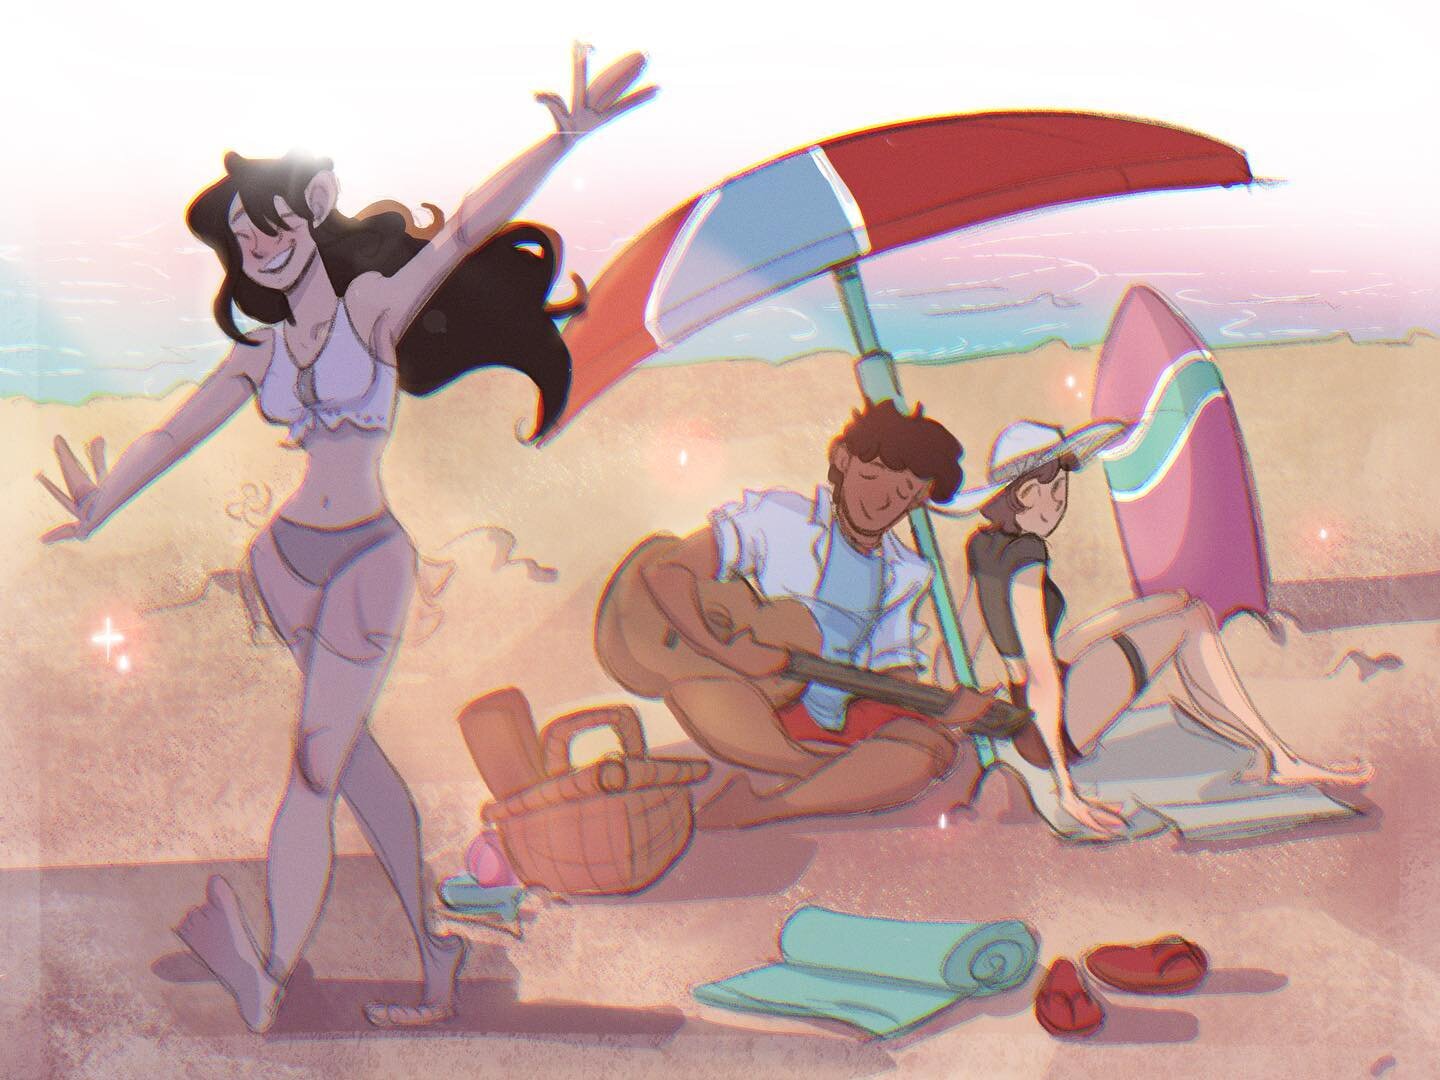 It's officially summer, Javi and Leah soak up the sun at the beach, accompanied by a familiar face, creating everlasting memories amidst the endless waves. 

Enjoy a relaxing lofi playlist featuring chill relaxing beats to soothe the mind, be product